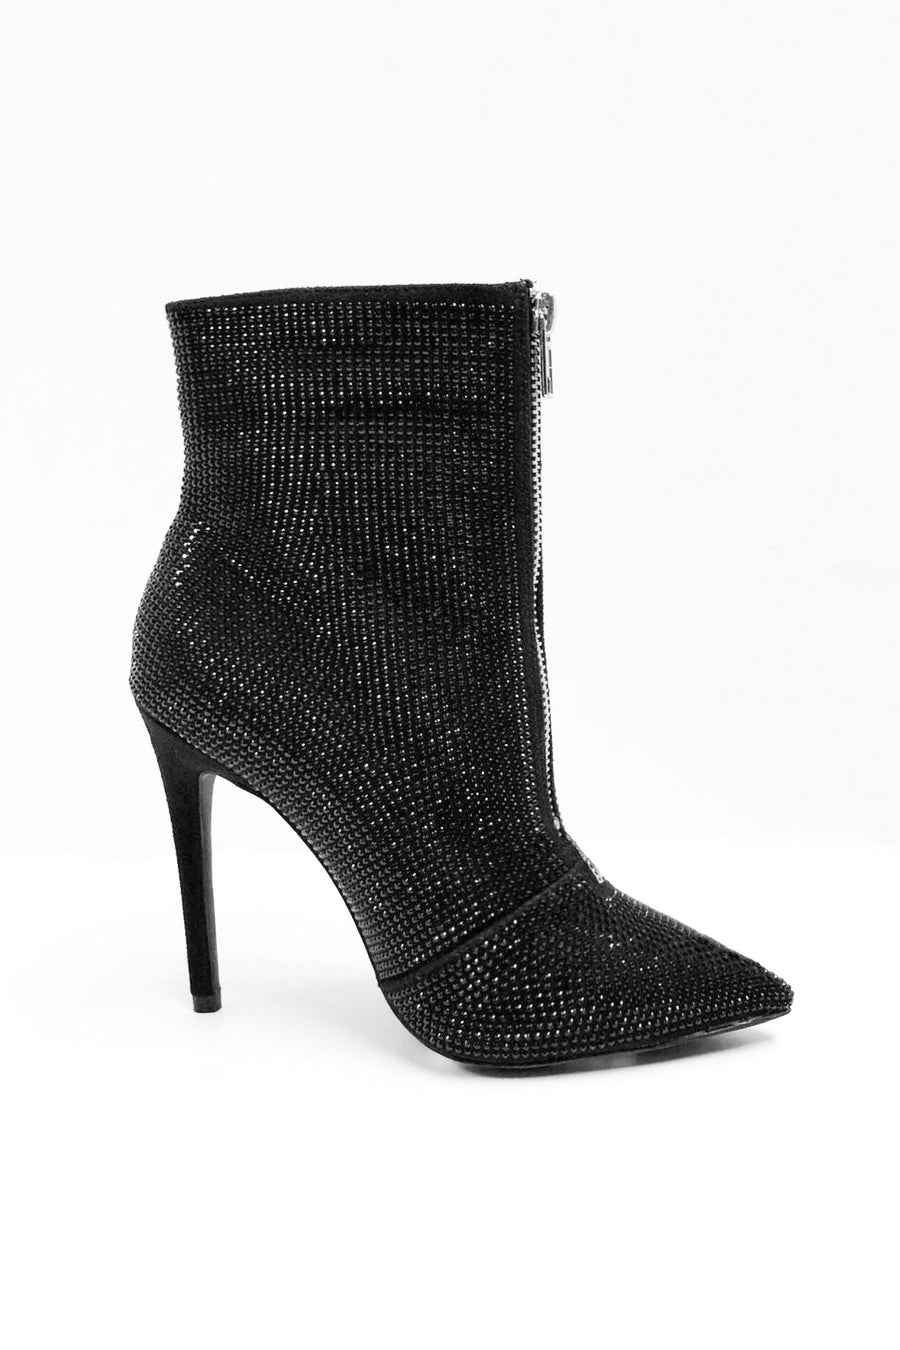 Black booties with shining stones - Dimesi Boutique